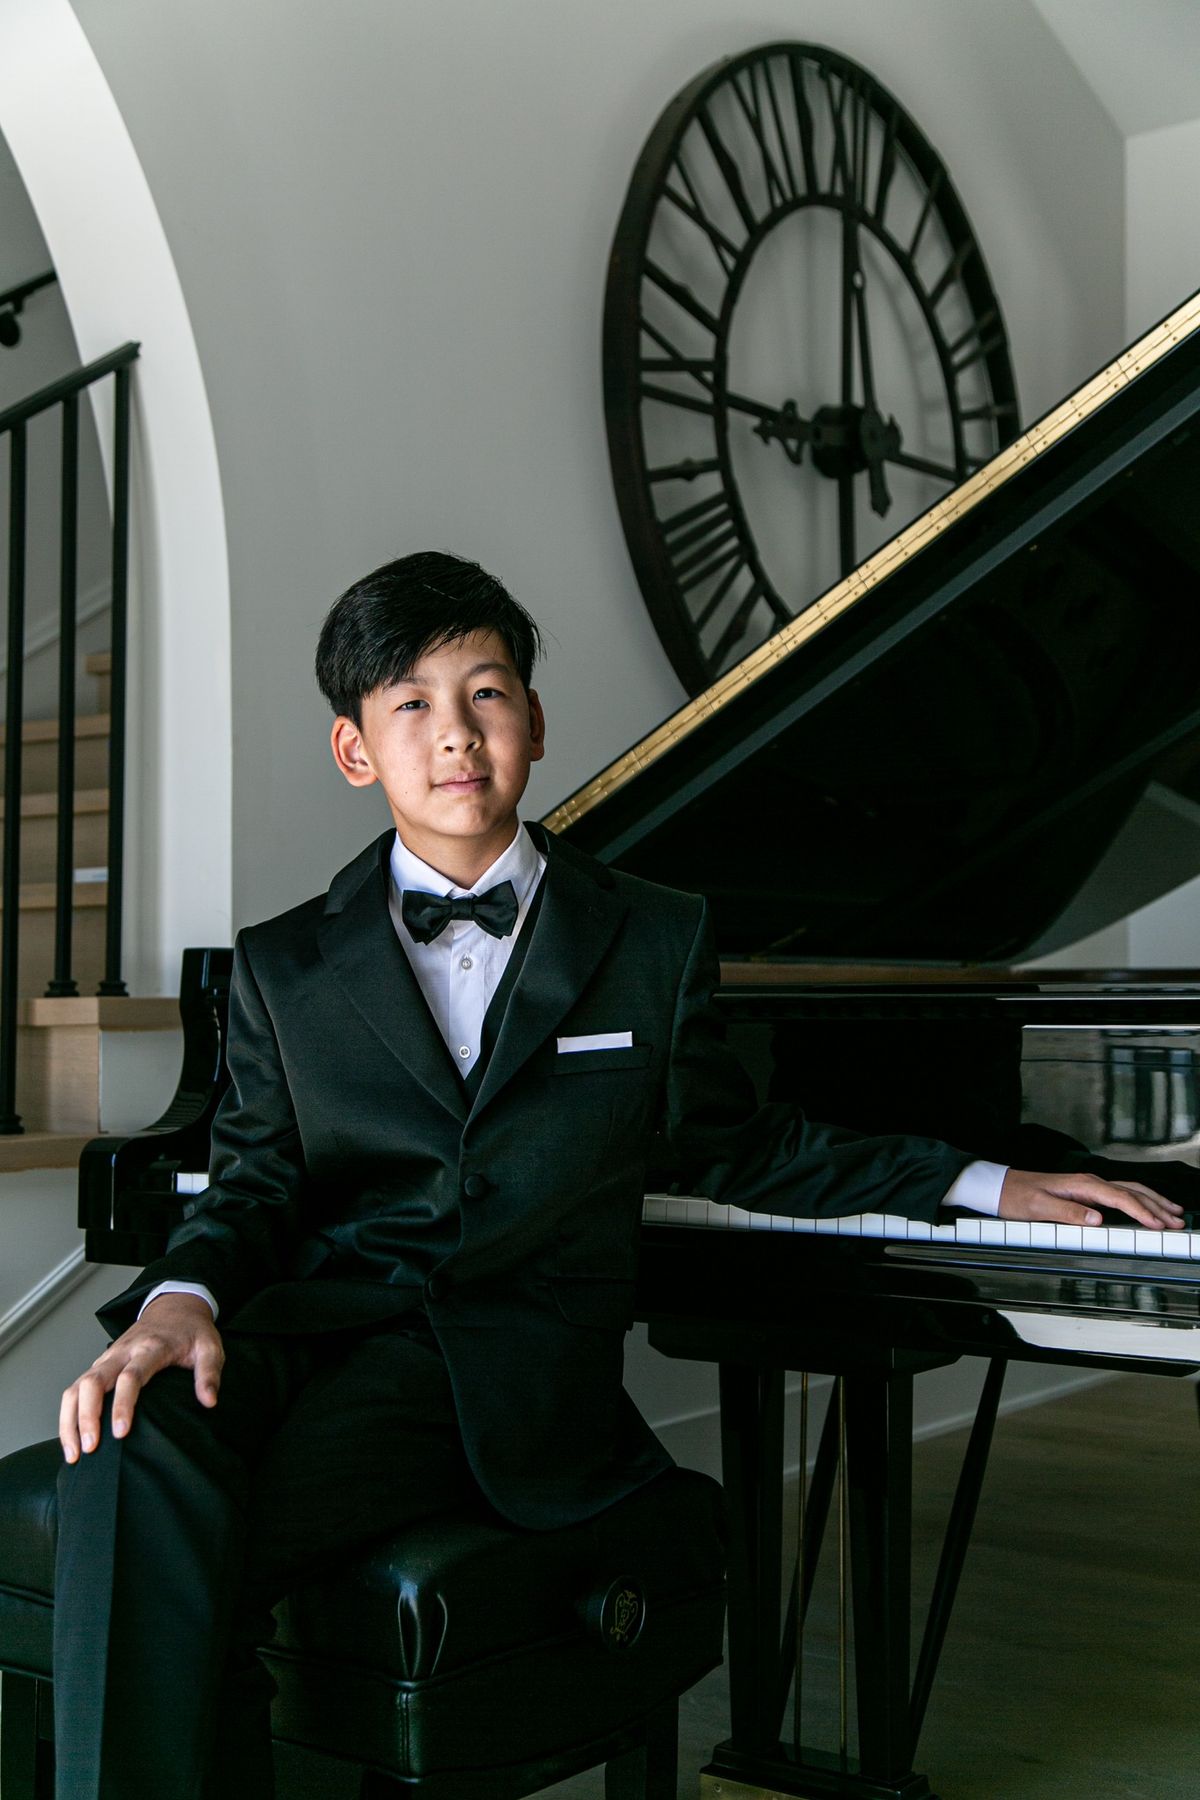 Hollywood Chamber Orchestra Presents: Yuze Lee, pianist